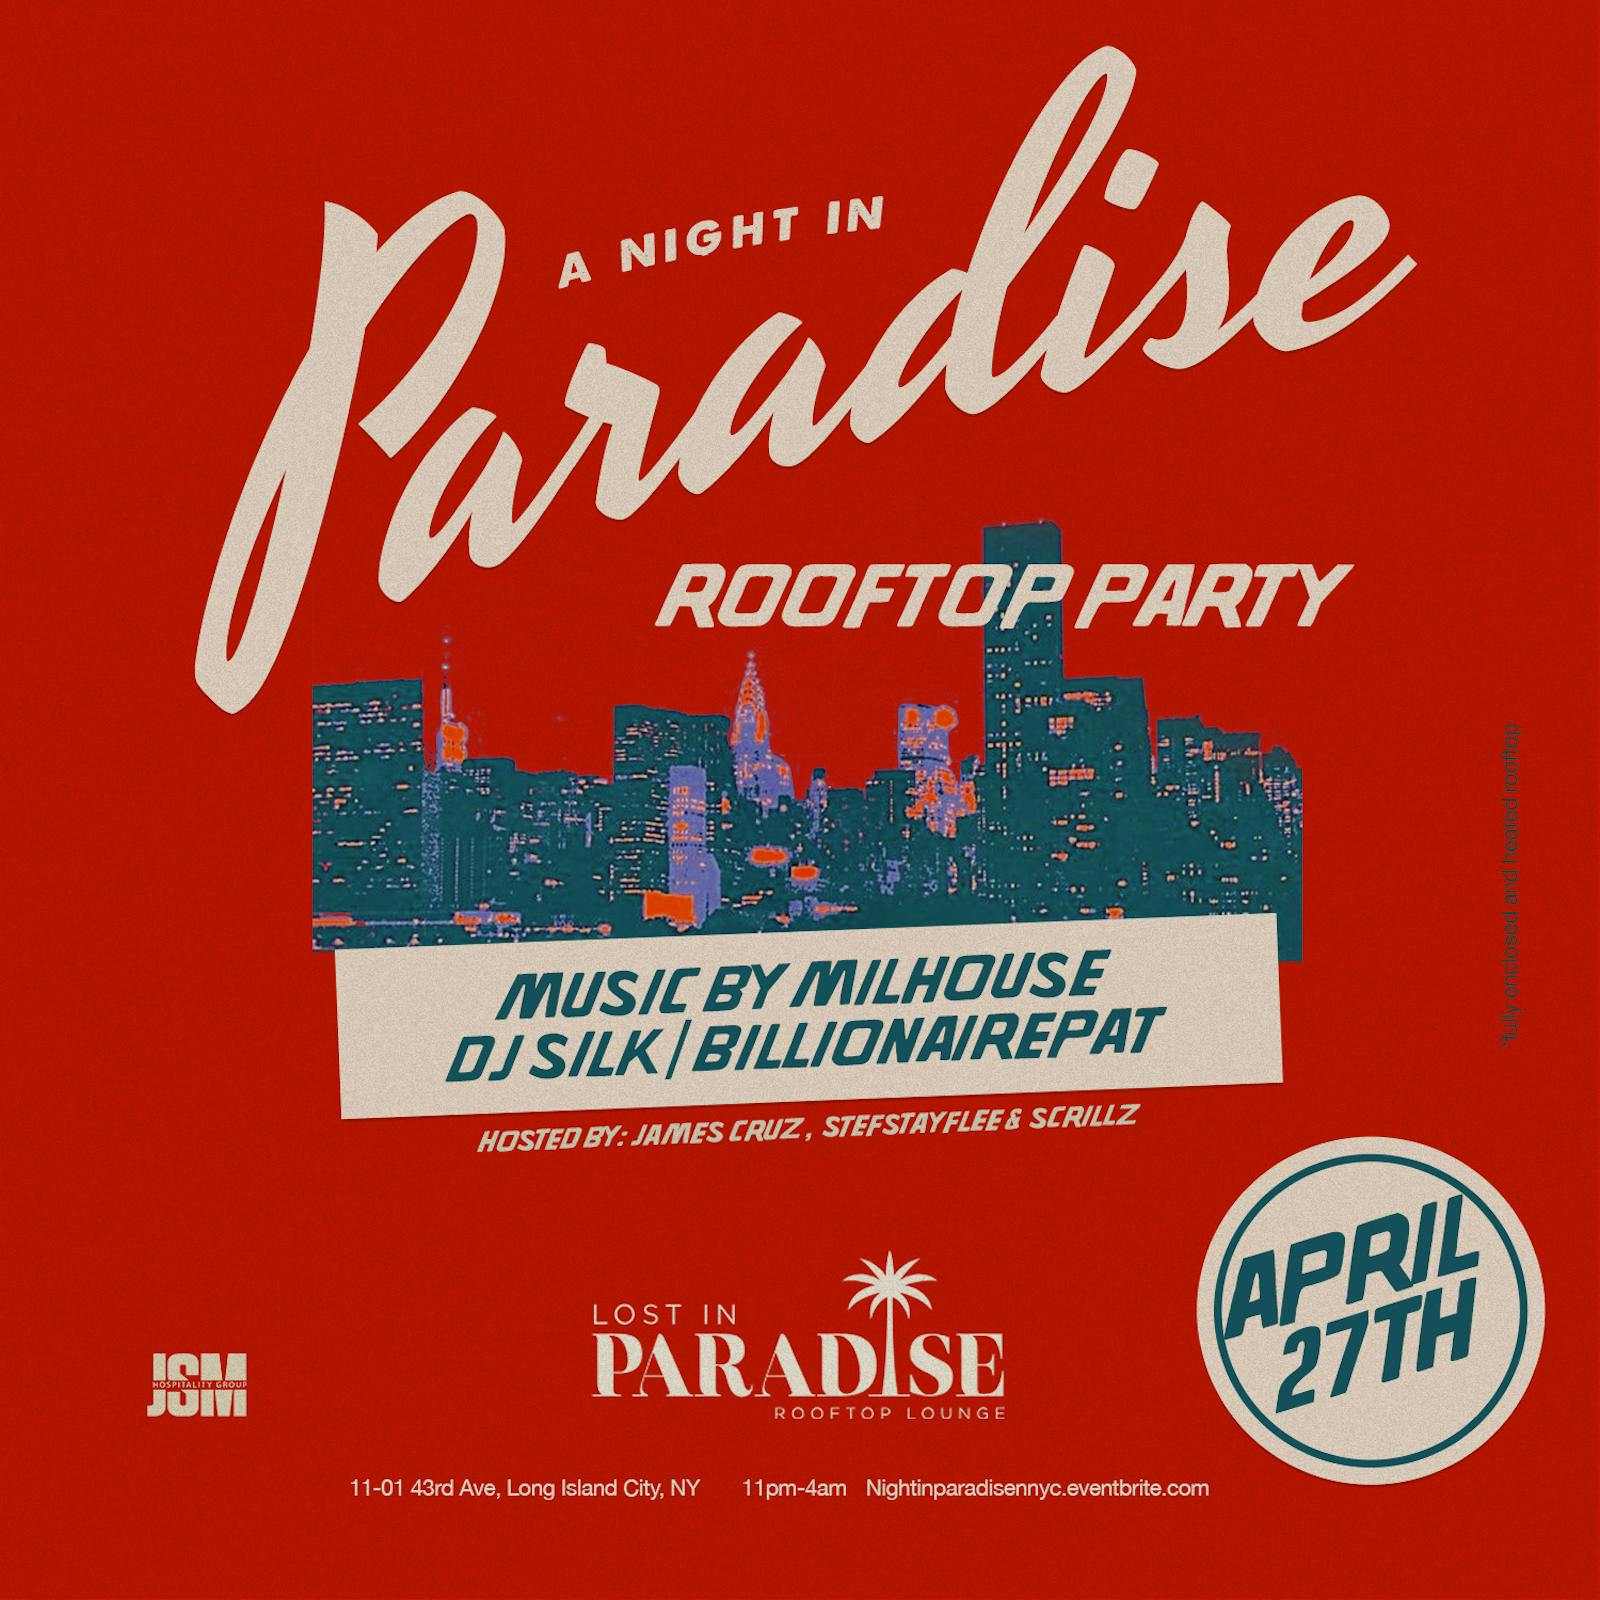 A Night In Paradise : Rooftop Party